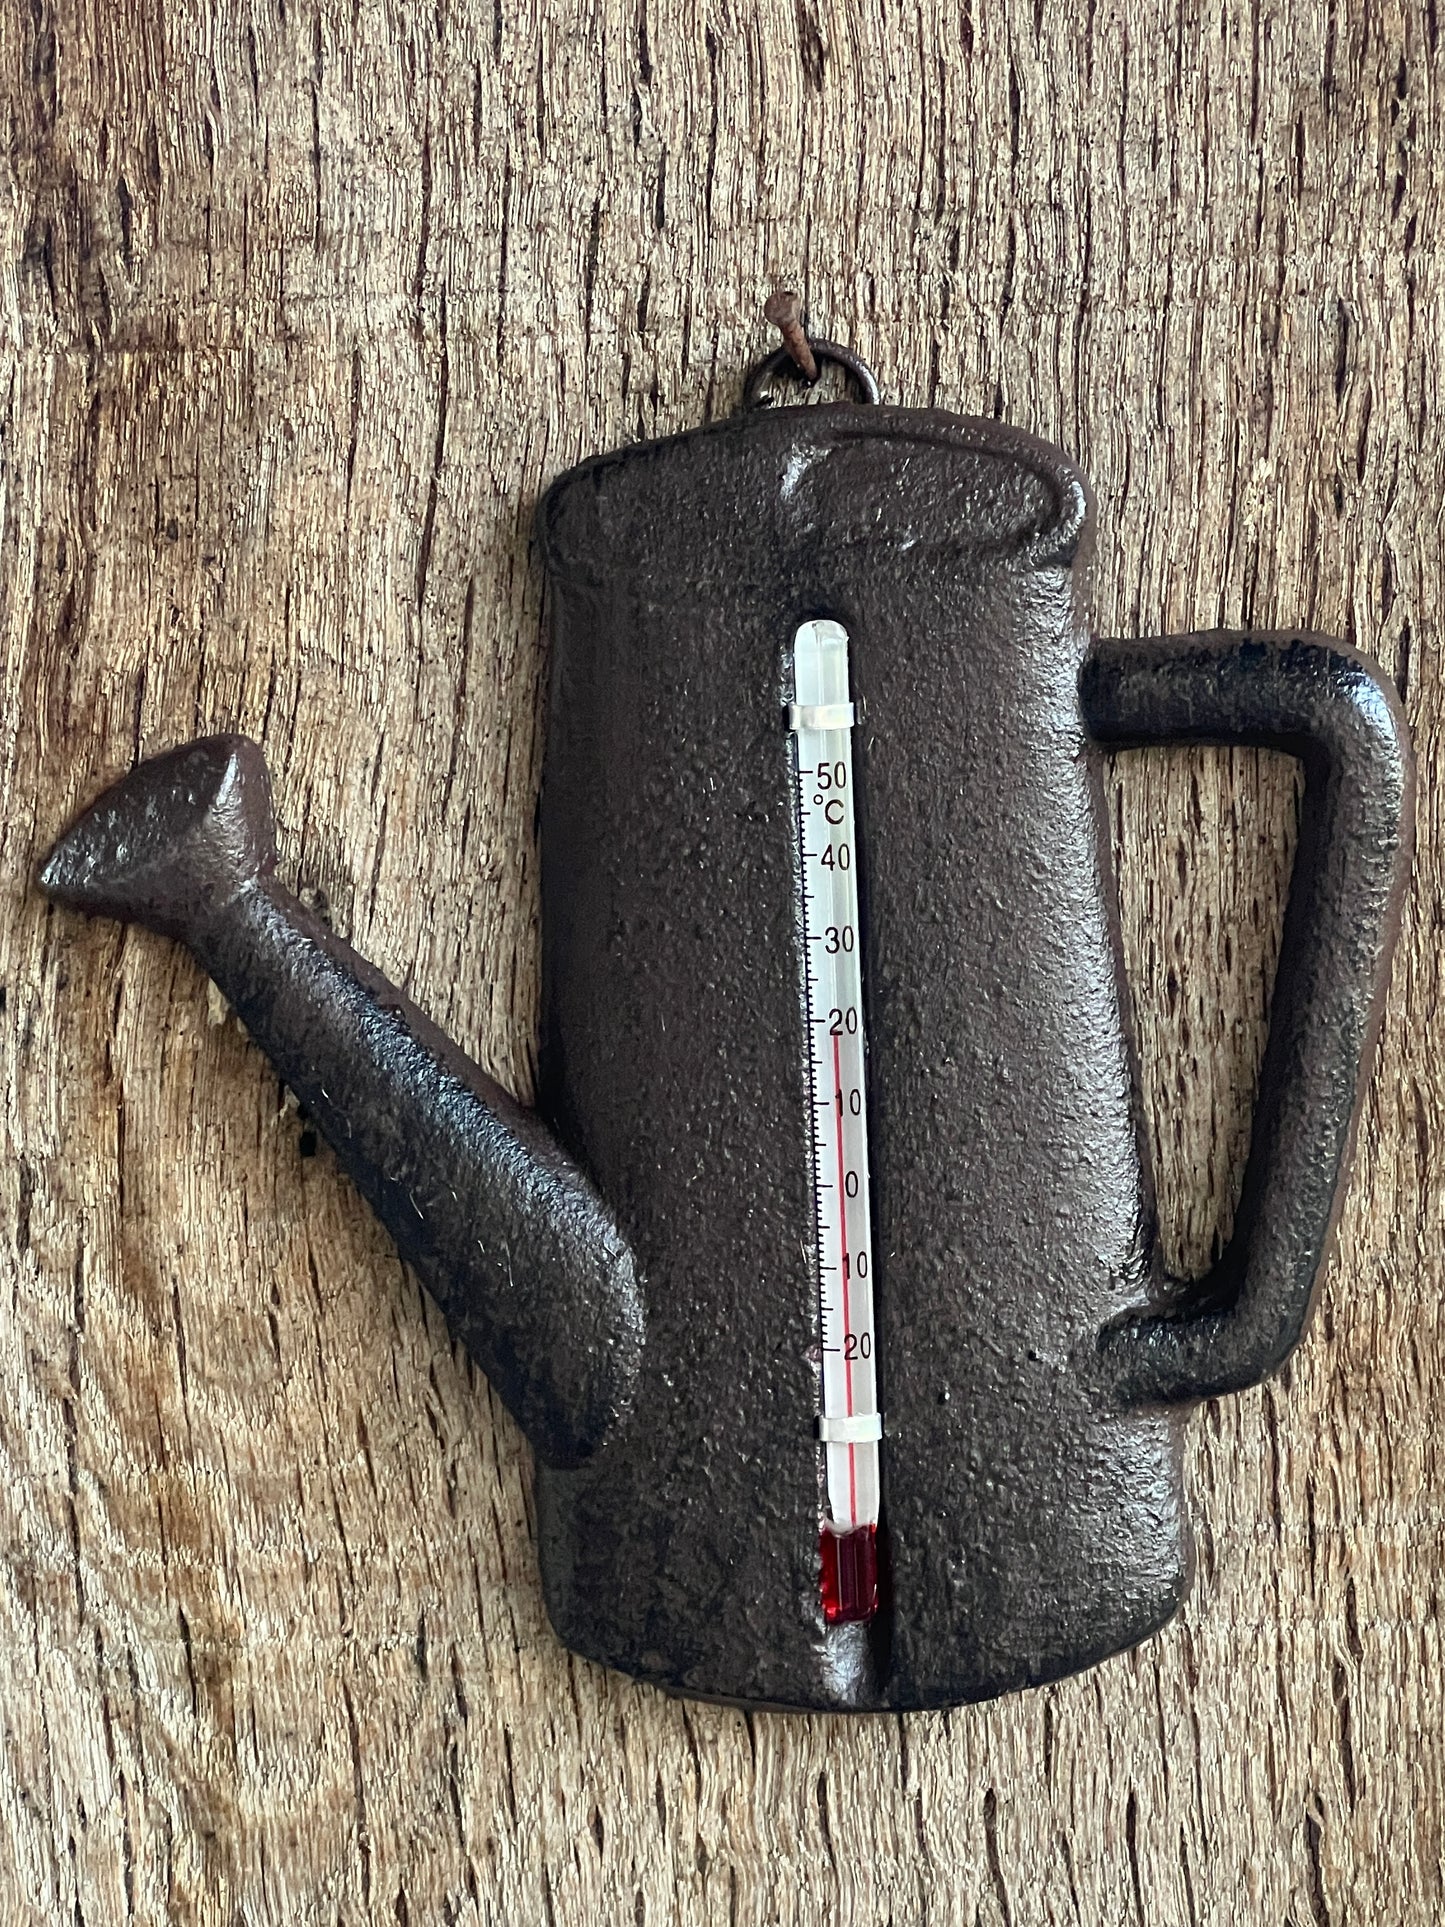 Thermometer Watering can